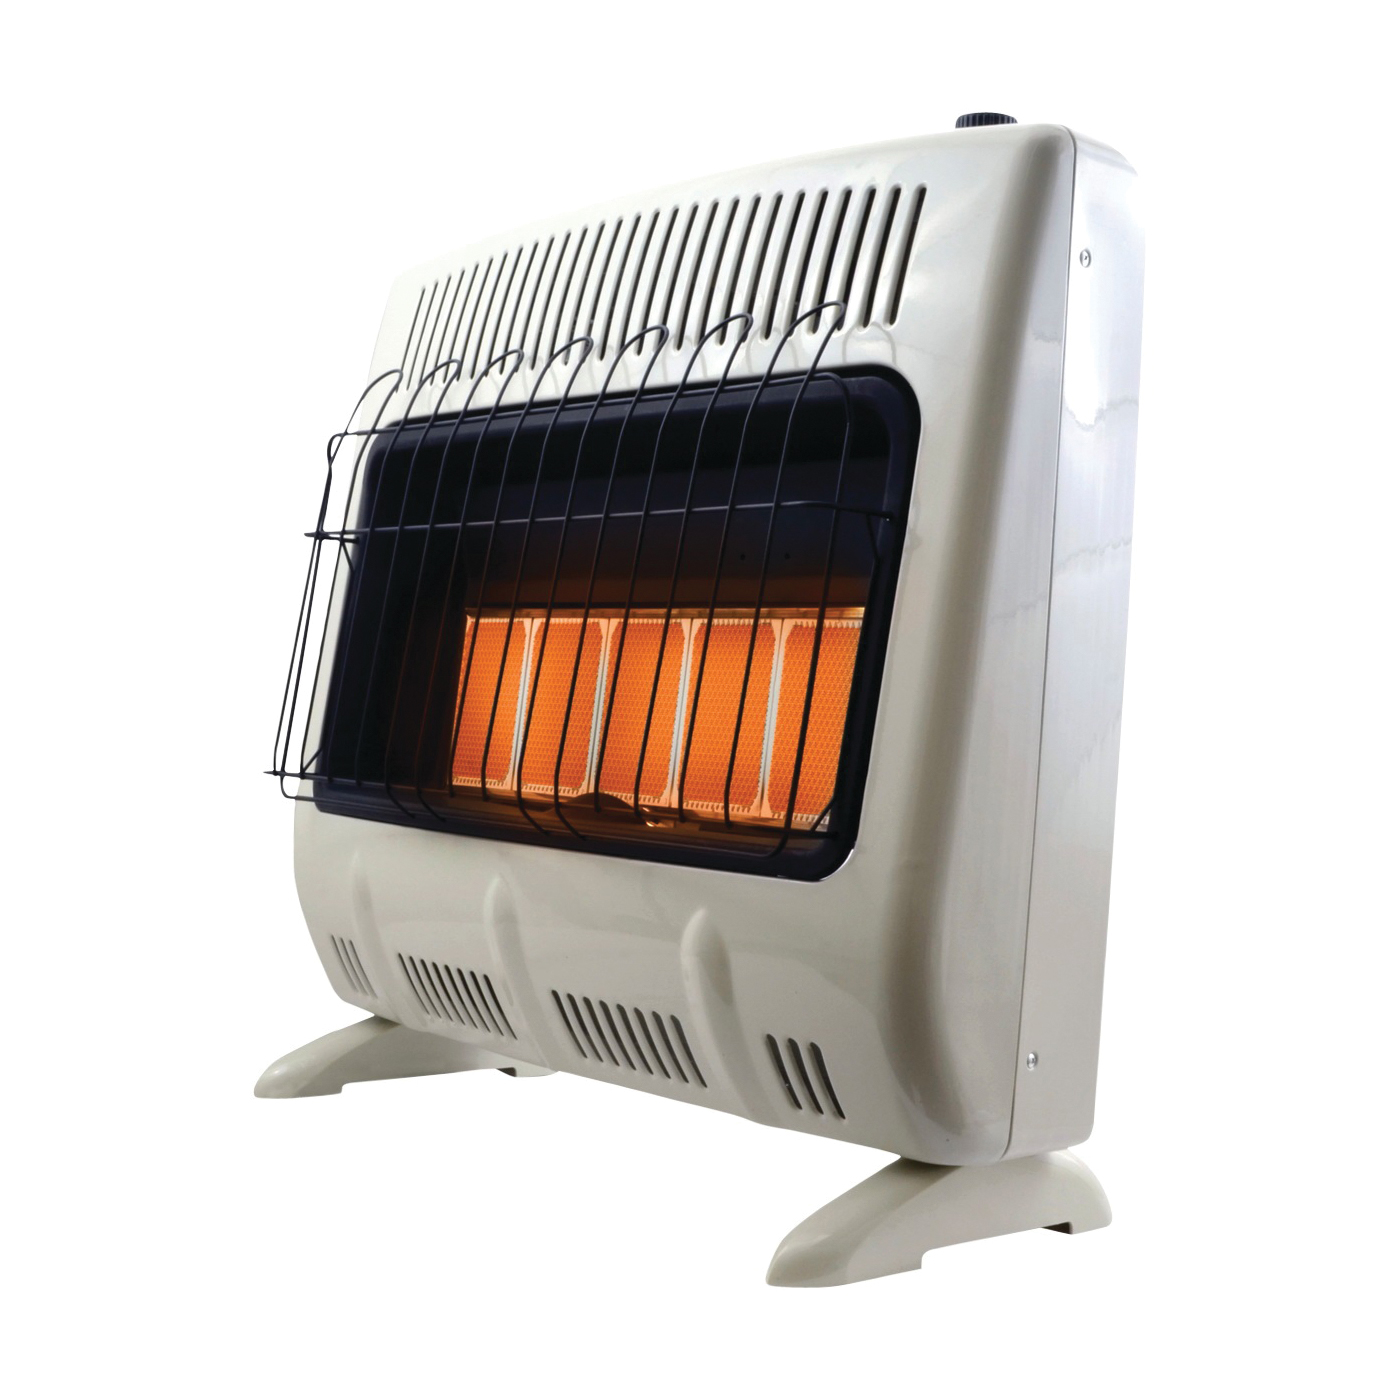 Mr. Heater F299831 Vent-Free Radiant Gas Heater, 11-1/4 in W, 27 in H, 30,000 Btu Heating, Natural Gas